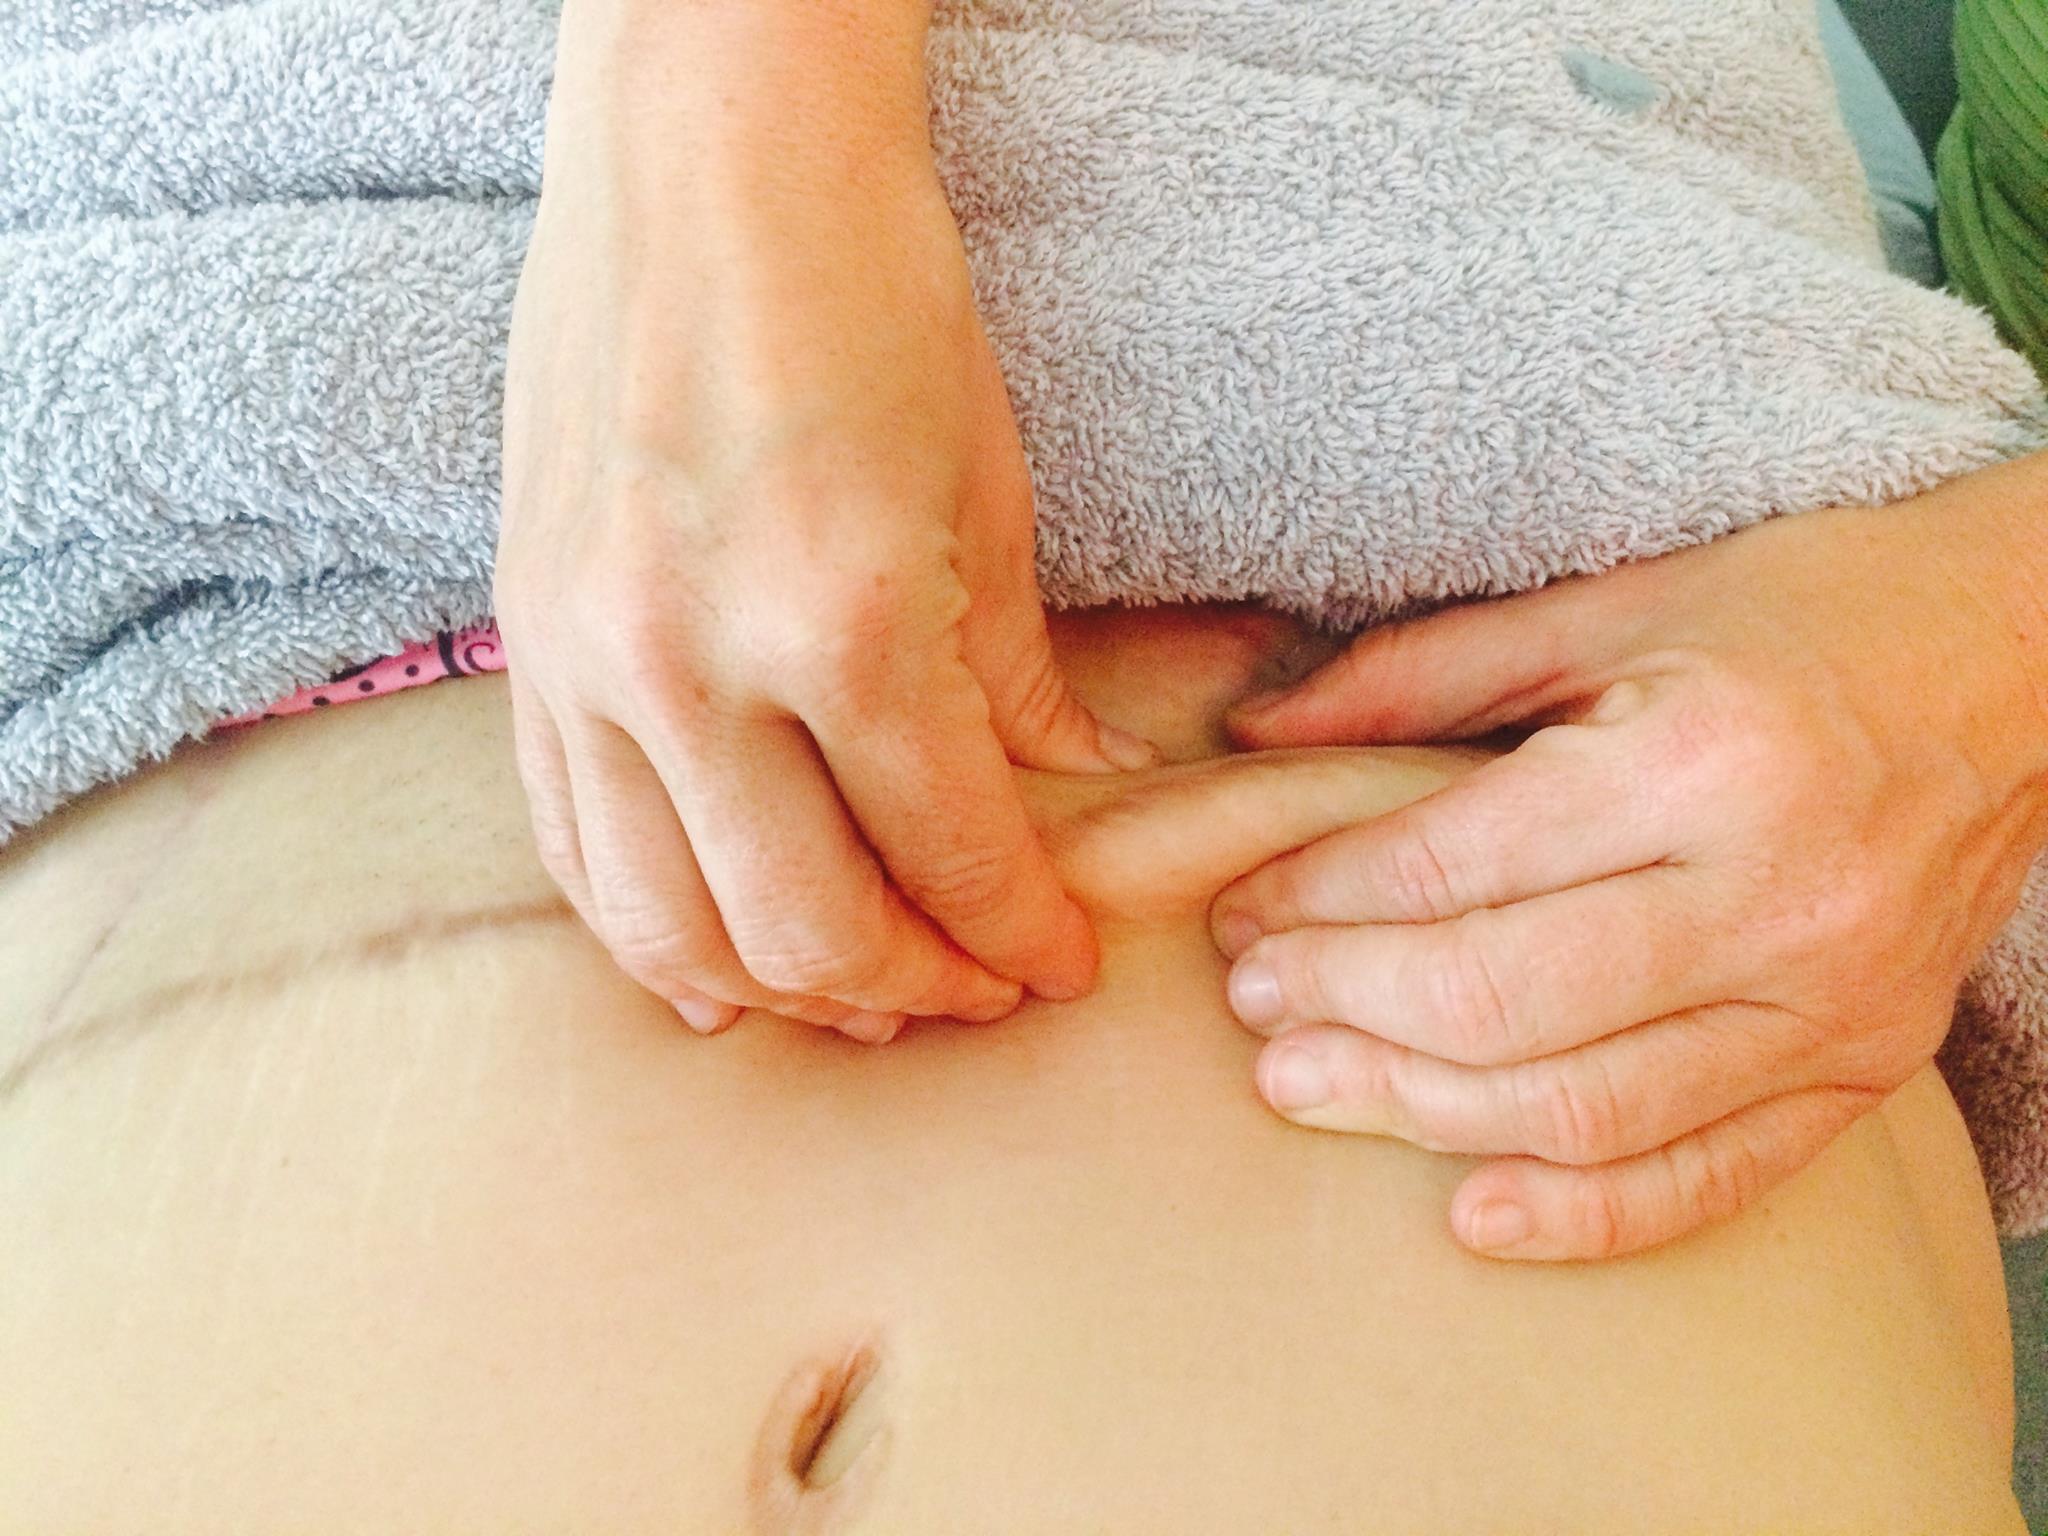 Treating caesarean and mastectomy scarring with myofascial release